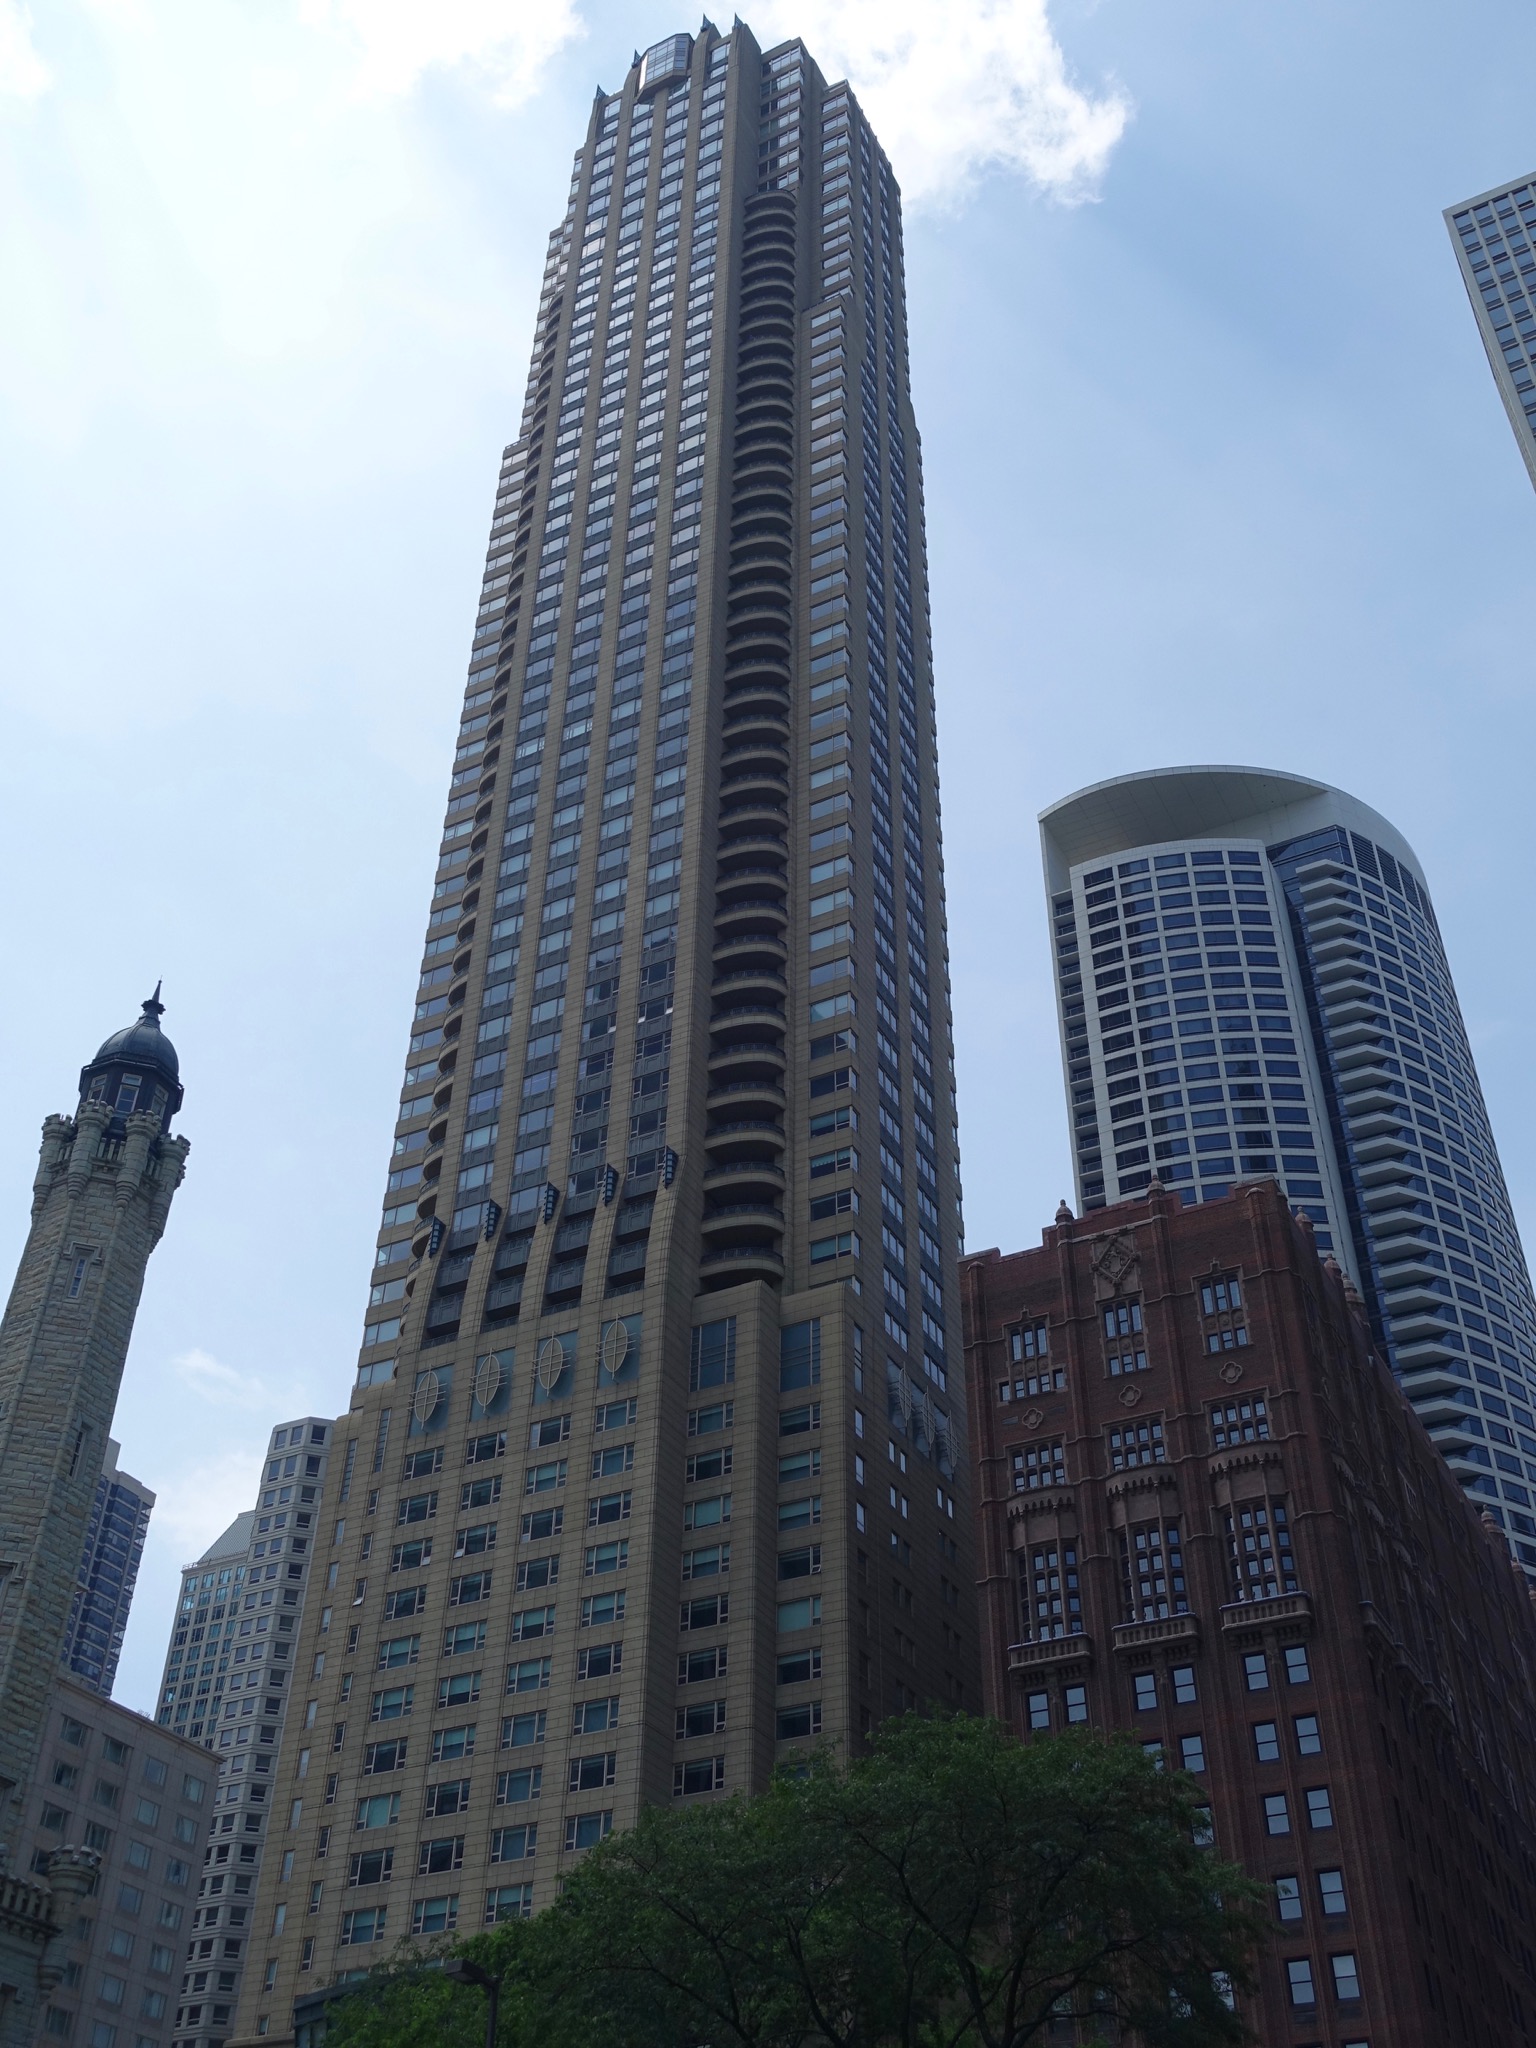 Photo 5 of 135 from the album Highlights Chicago 2015.